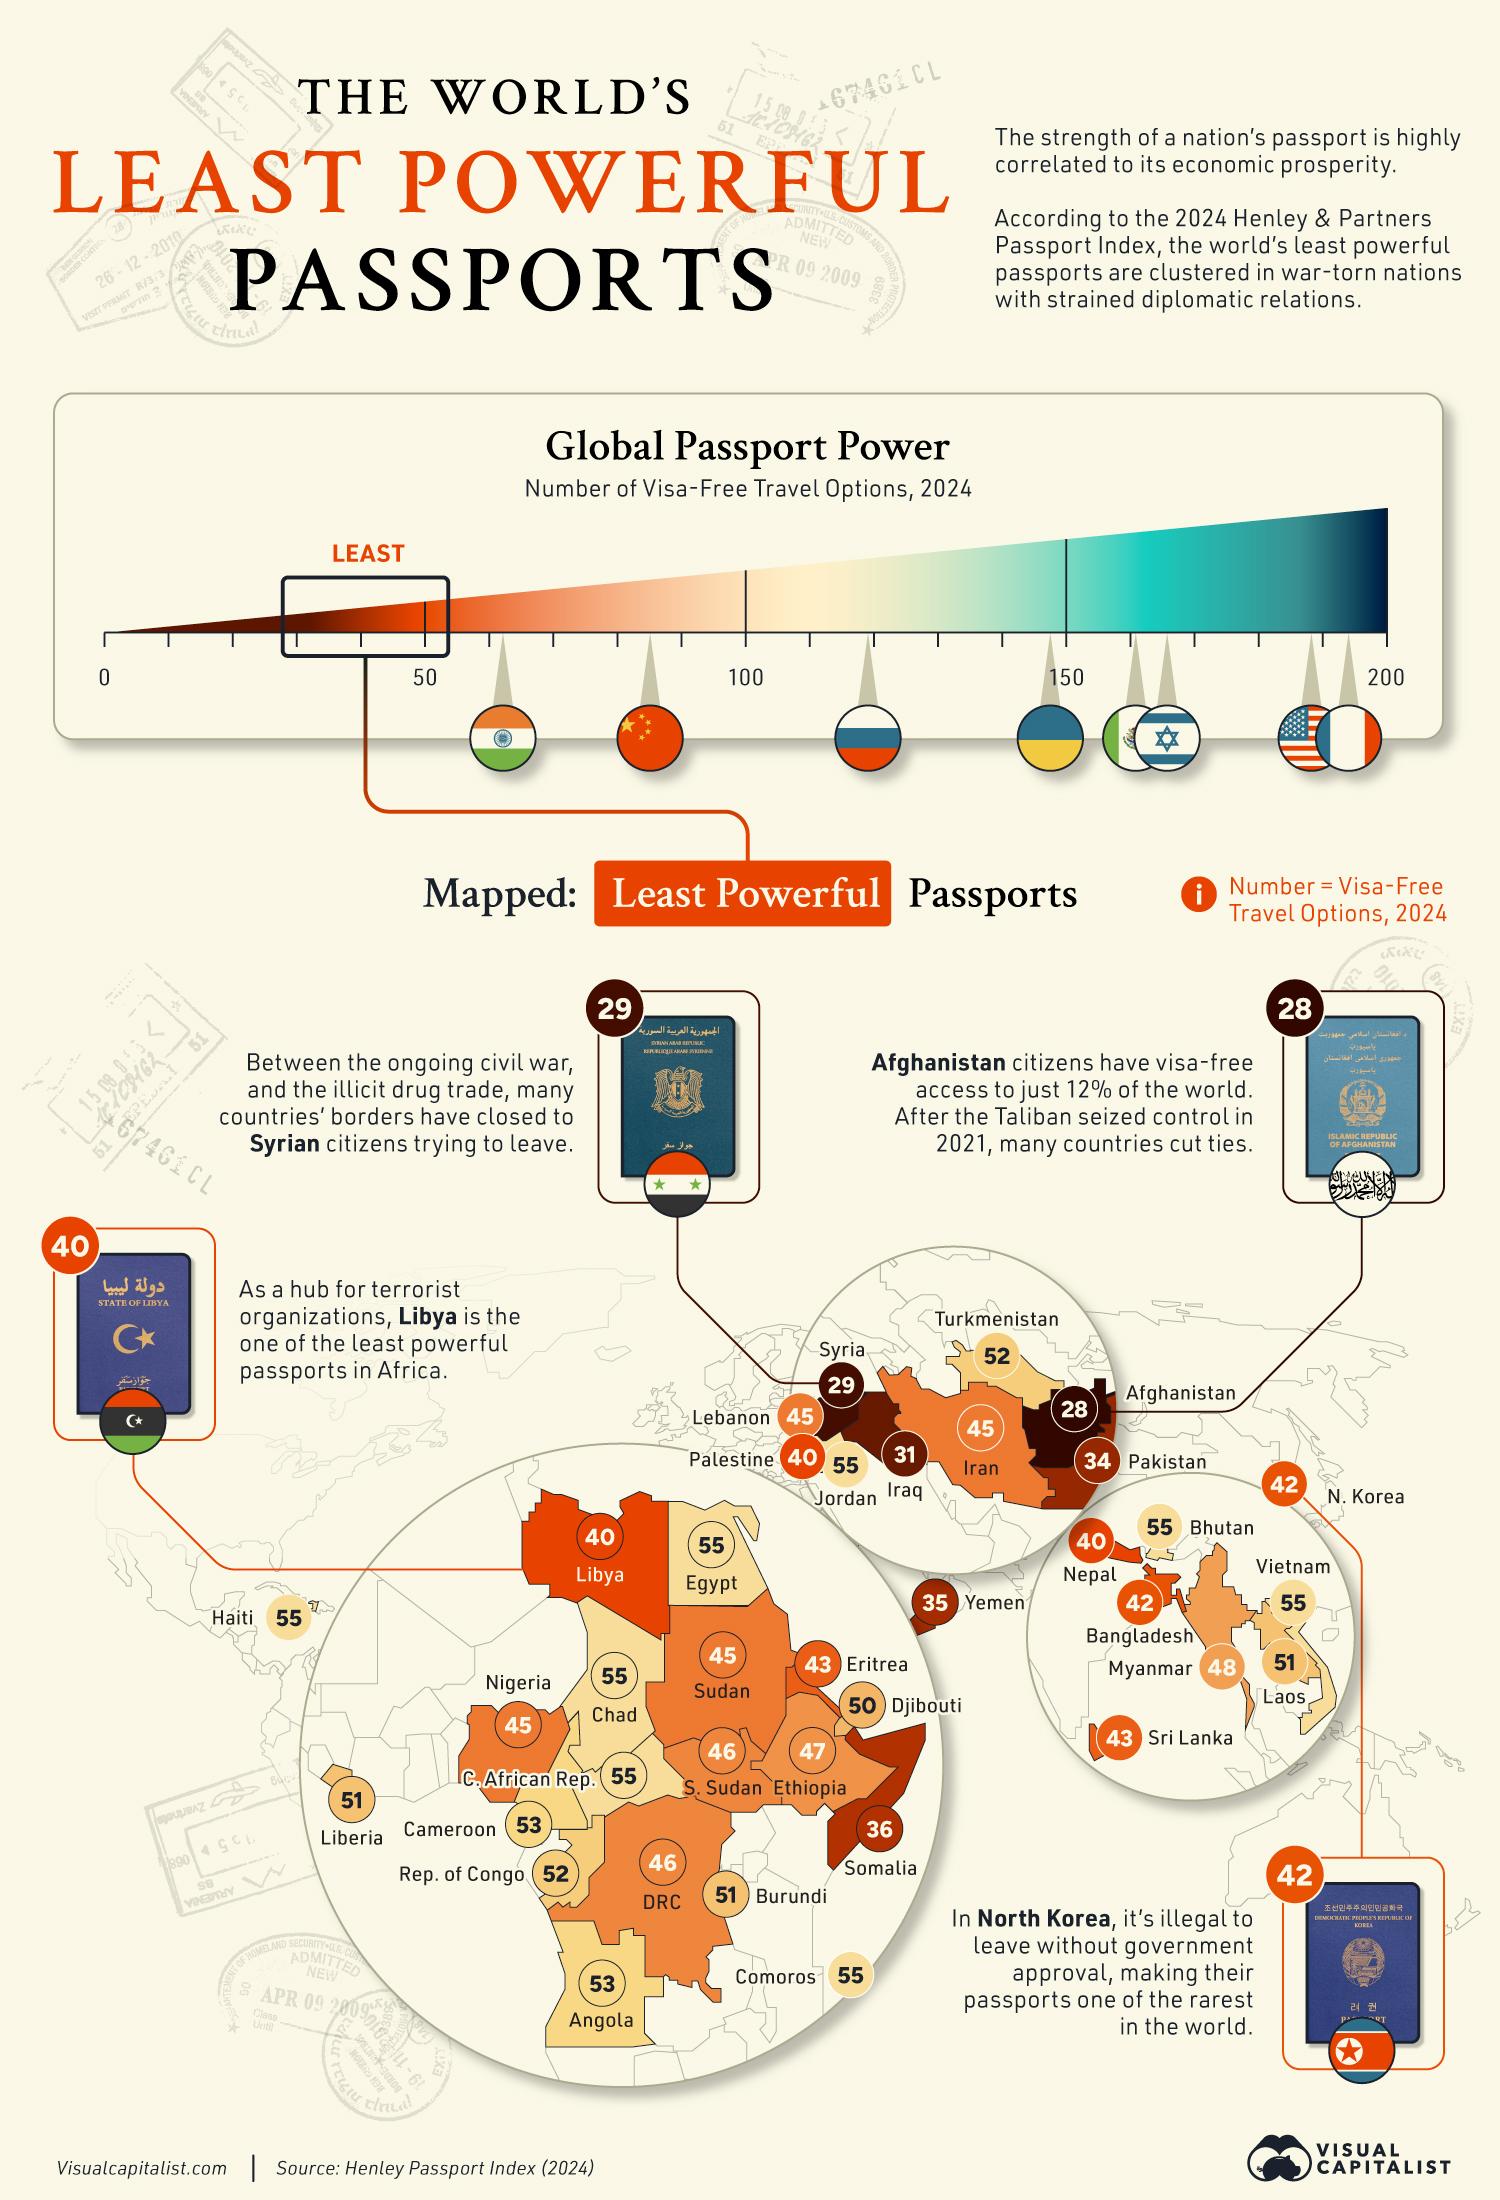 The World's Least Powerful Passports in 2024